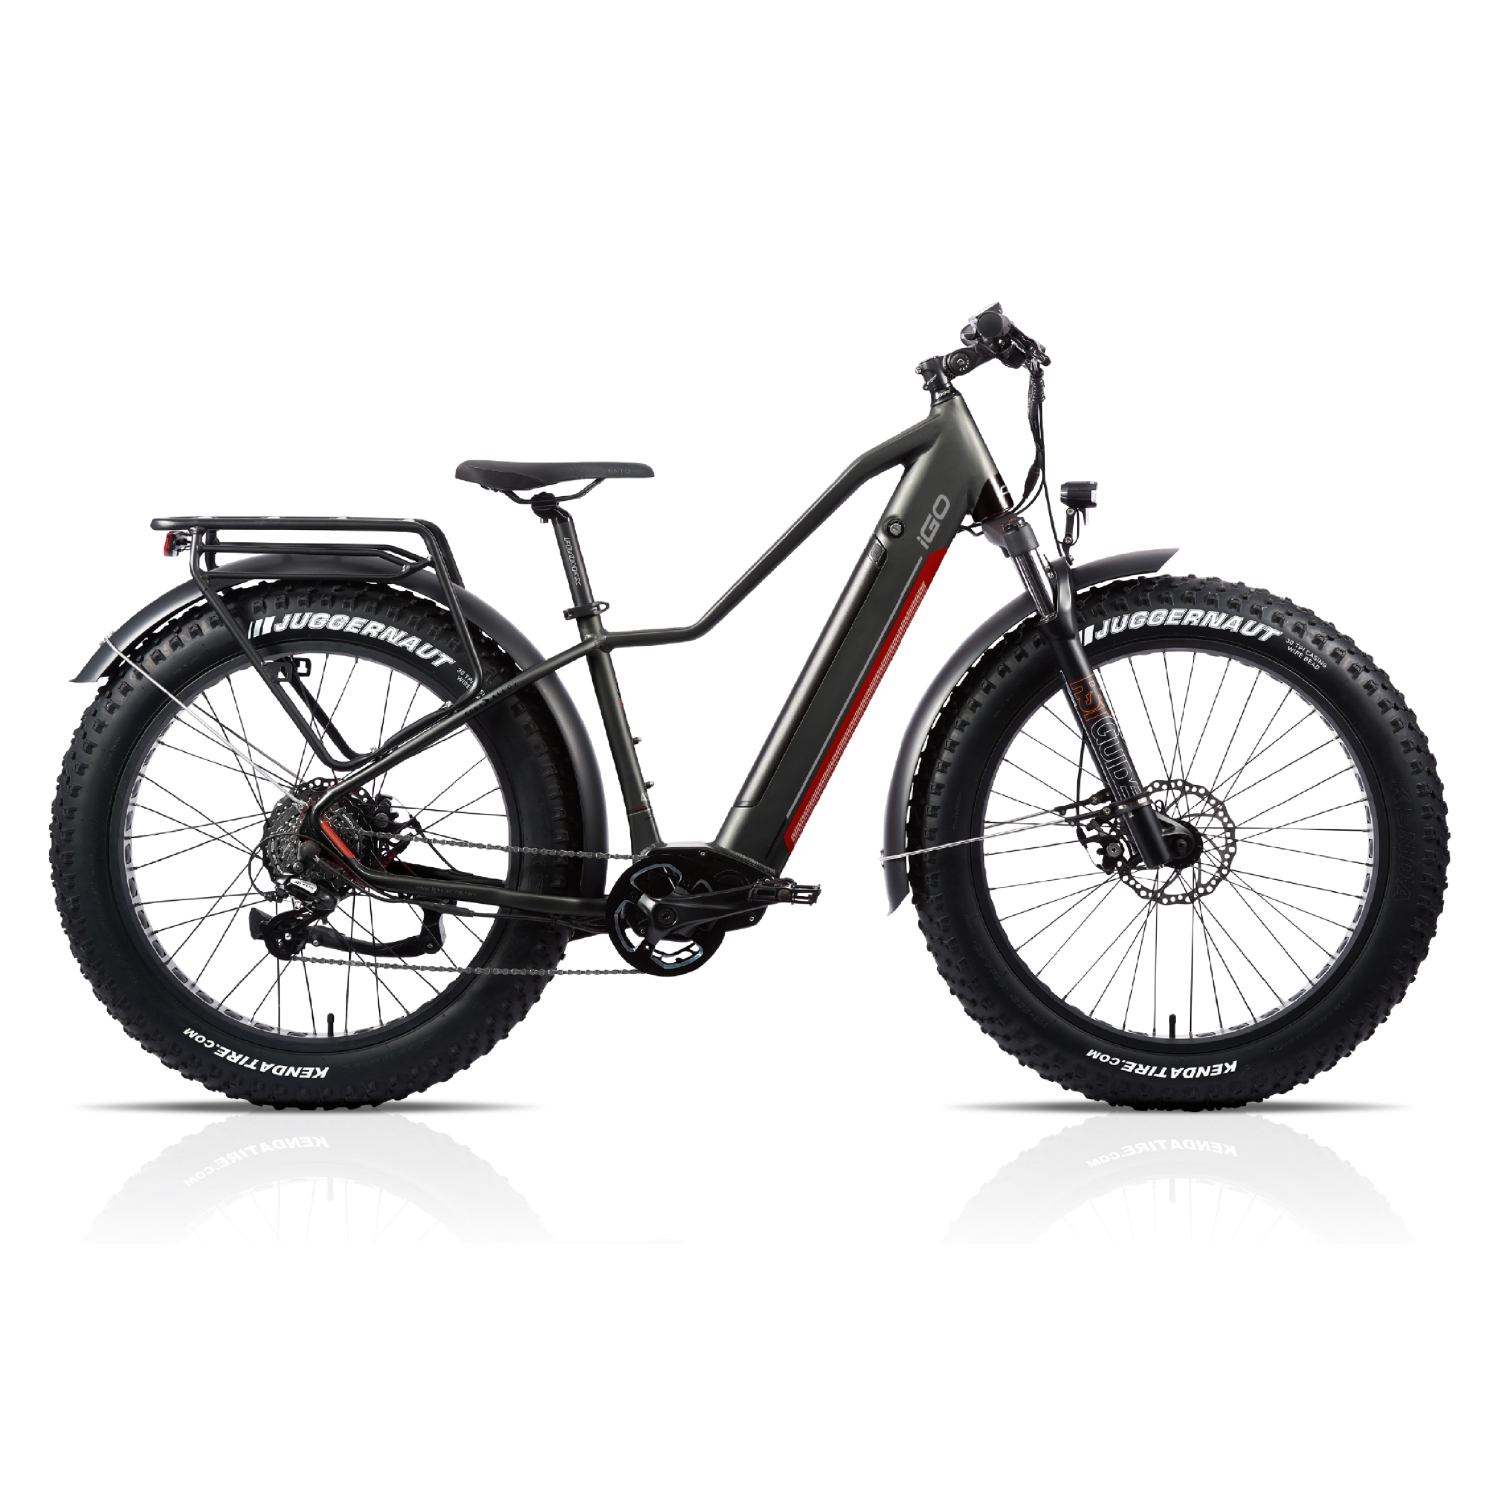 OPEN BOX - iGO Electric Extreme 3.1 Electric Fat Bike (500W Motor, 48V/12Ah Battery, 8 Speed) - Matte Graphite and Race Red